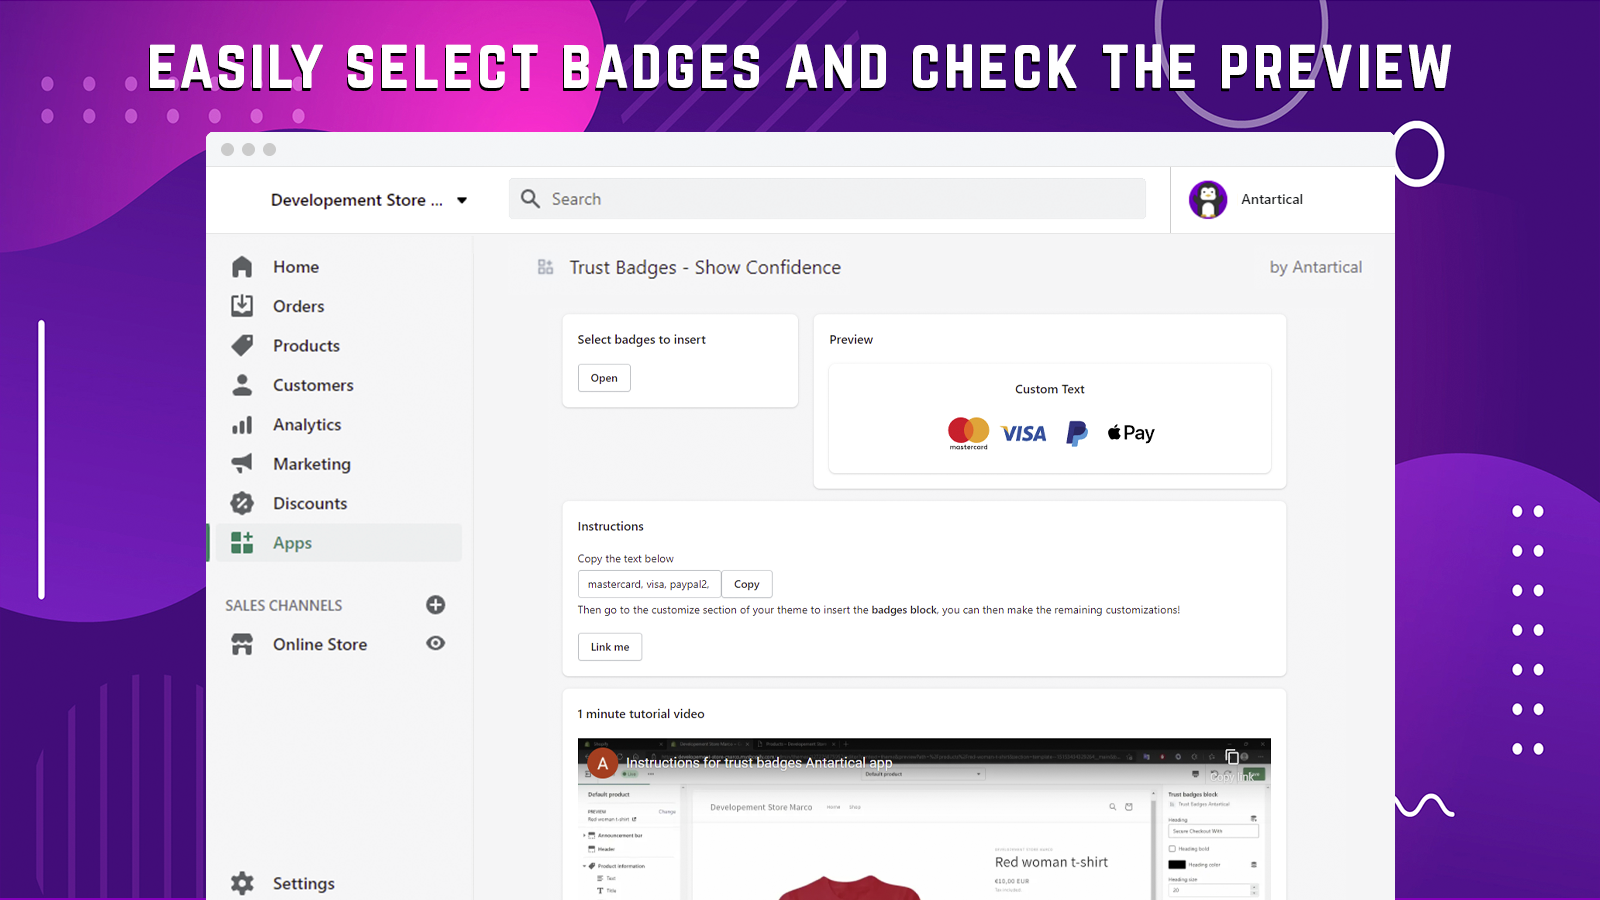 Easily select badges and check the preview